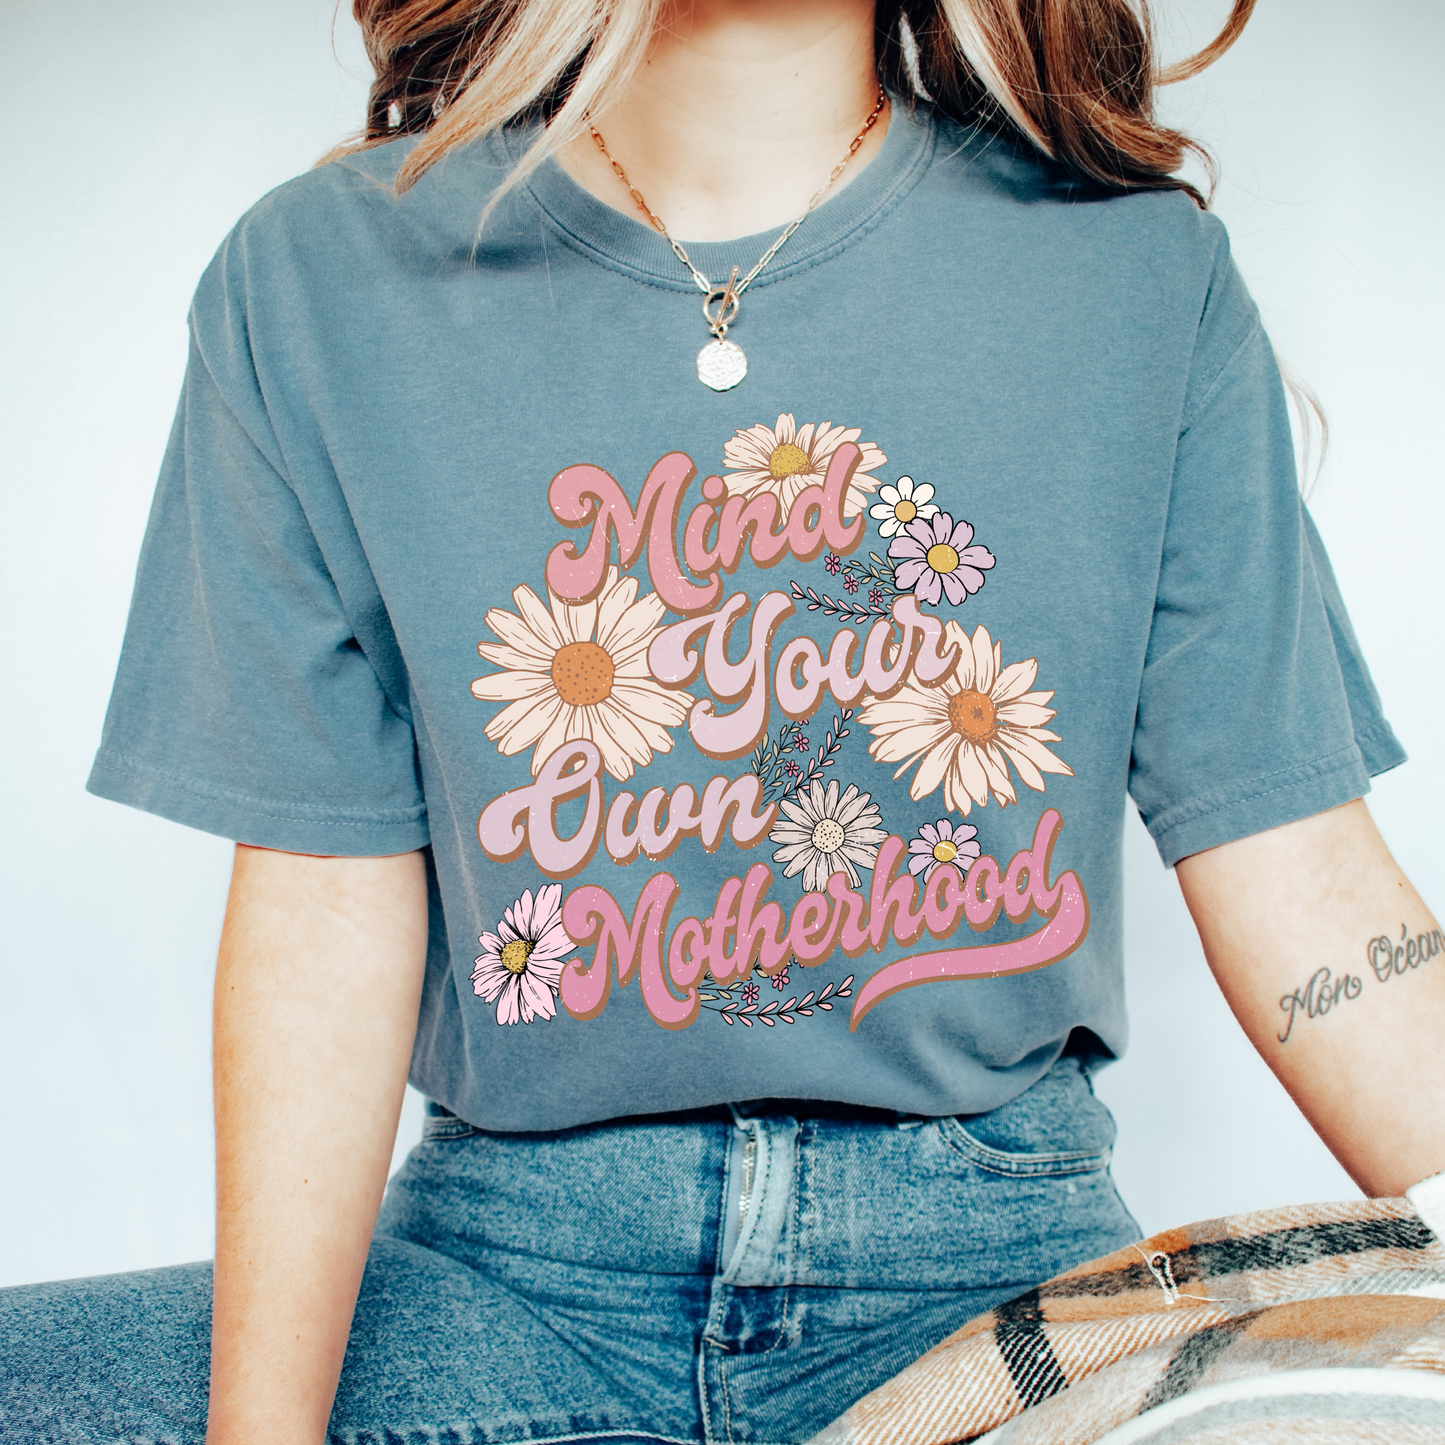 Mind your own Motherhood t shirt in Comfort Colors